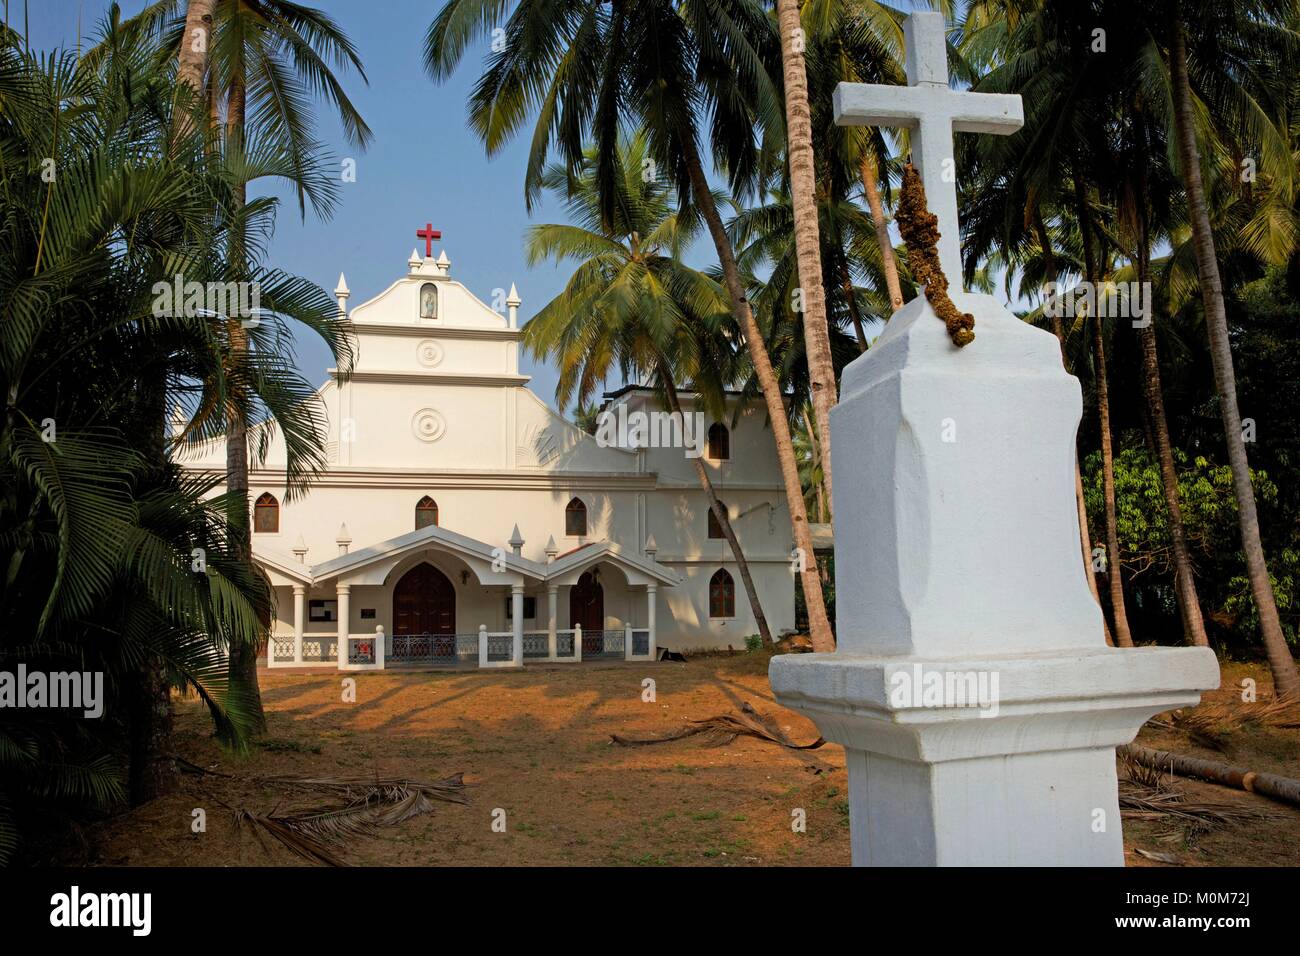 India,Goa,Coco beach,whith portuguese catholic church and his crew in the middle of coconut trees Stock Photo